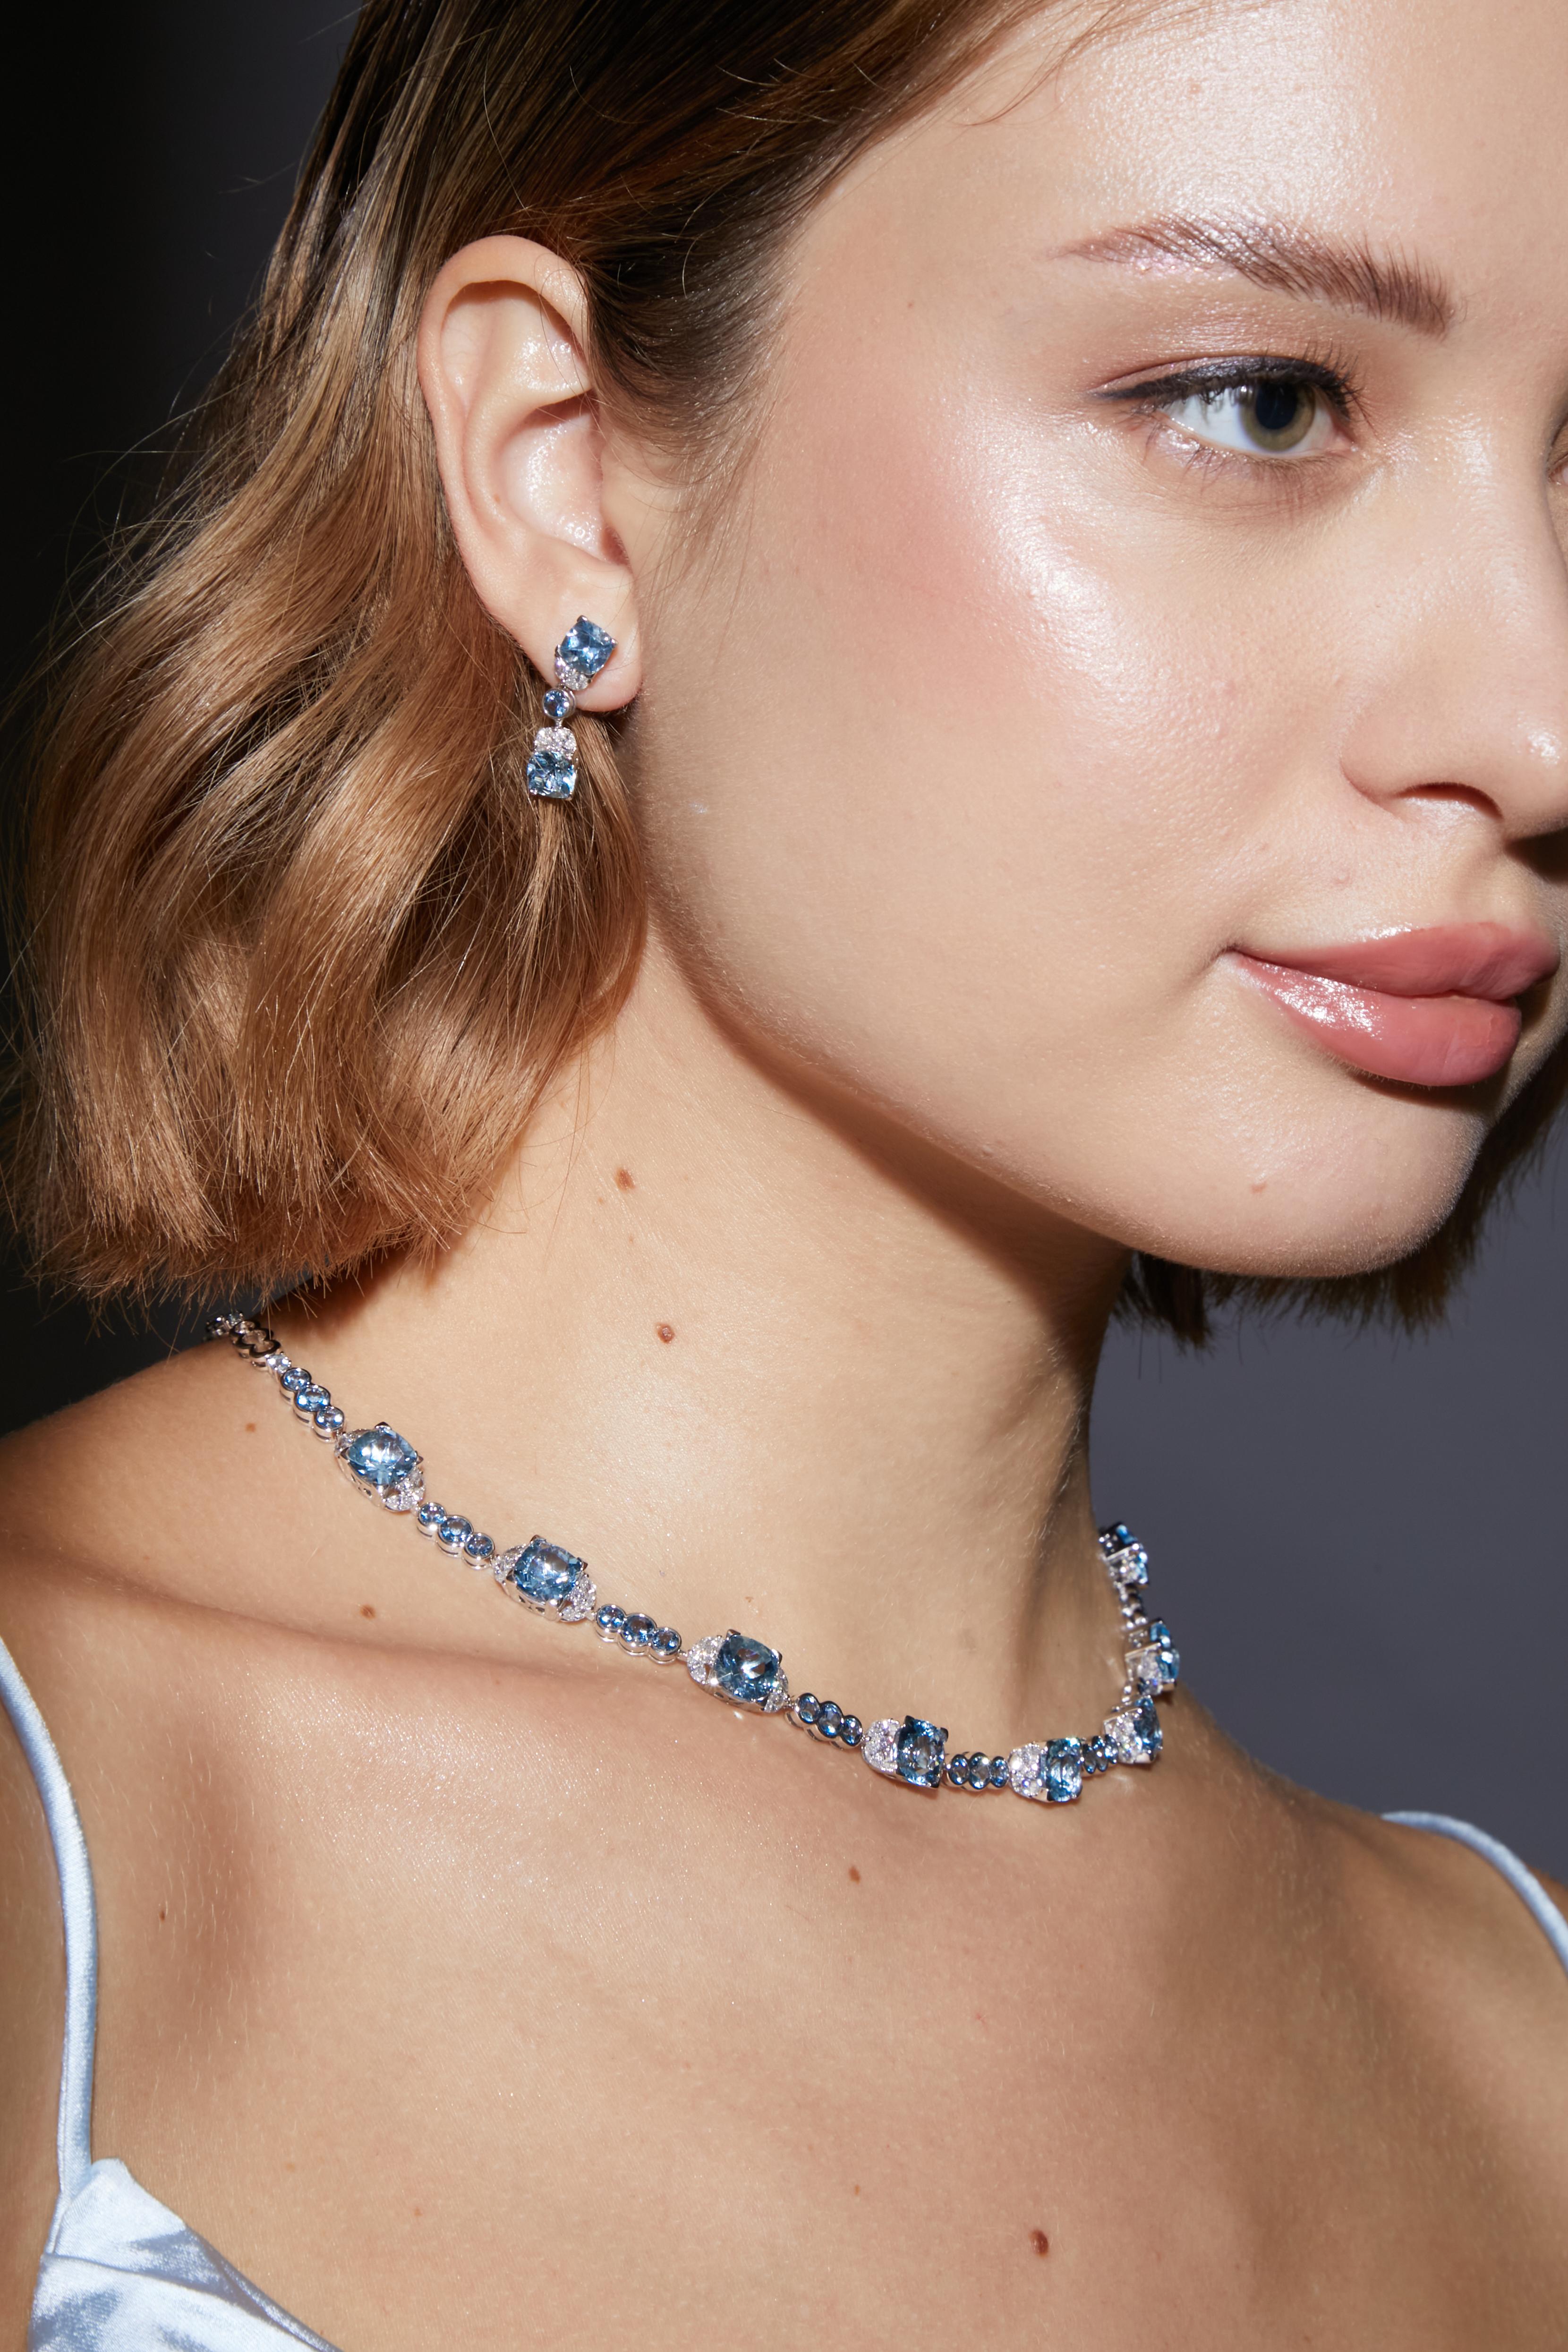 Sunita Nahata Fine Design presents the second edition of its Blue Planet collection – an ode to the vast oceans of our planet. This collection uses the finest deep blue Santa Maria Aquamarines and are elegantly accented with diamonds set in white